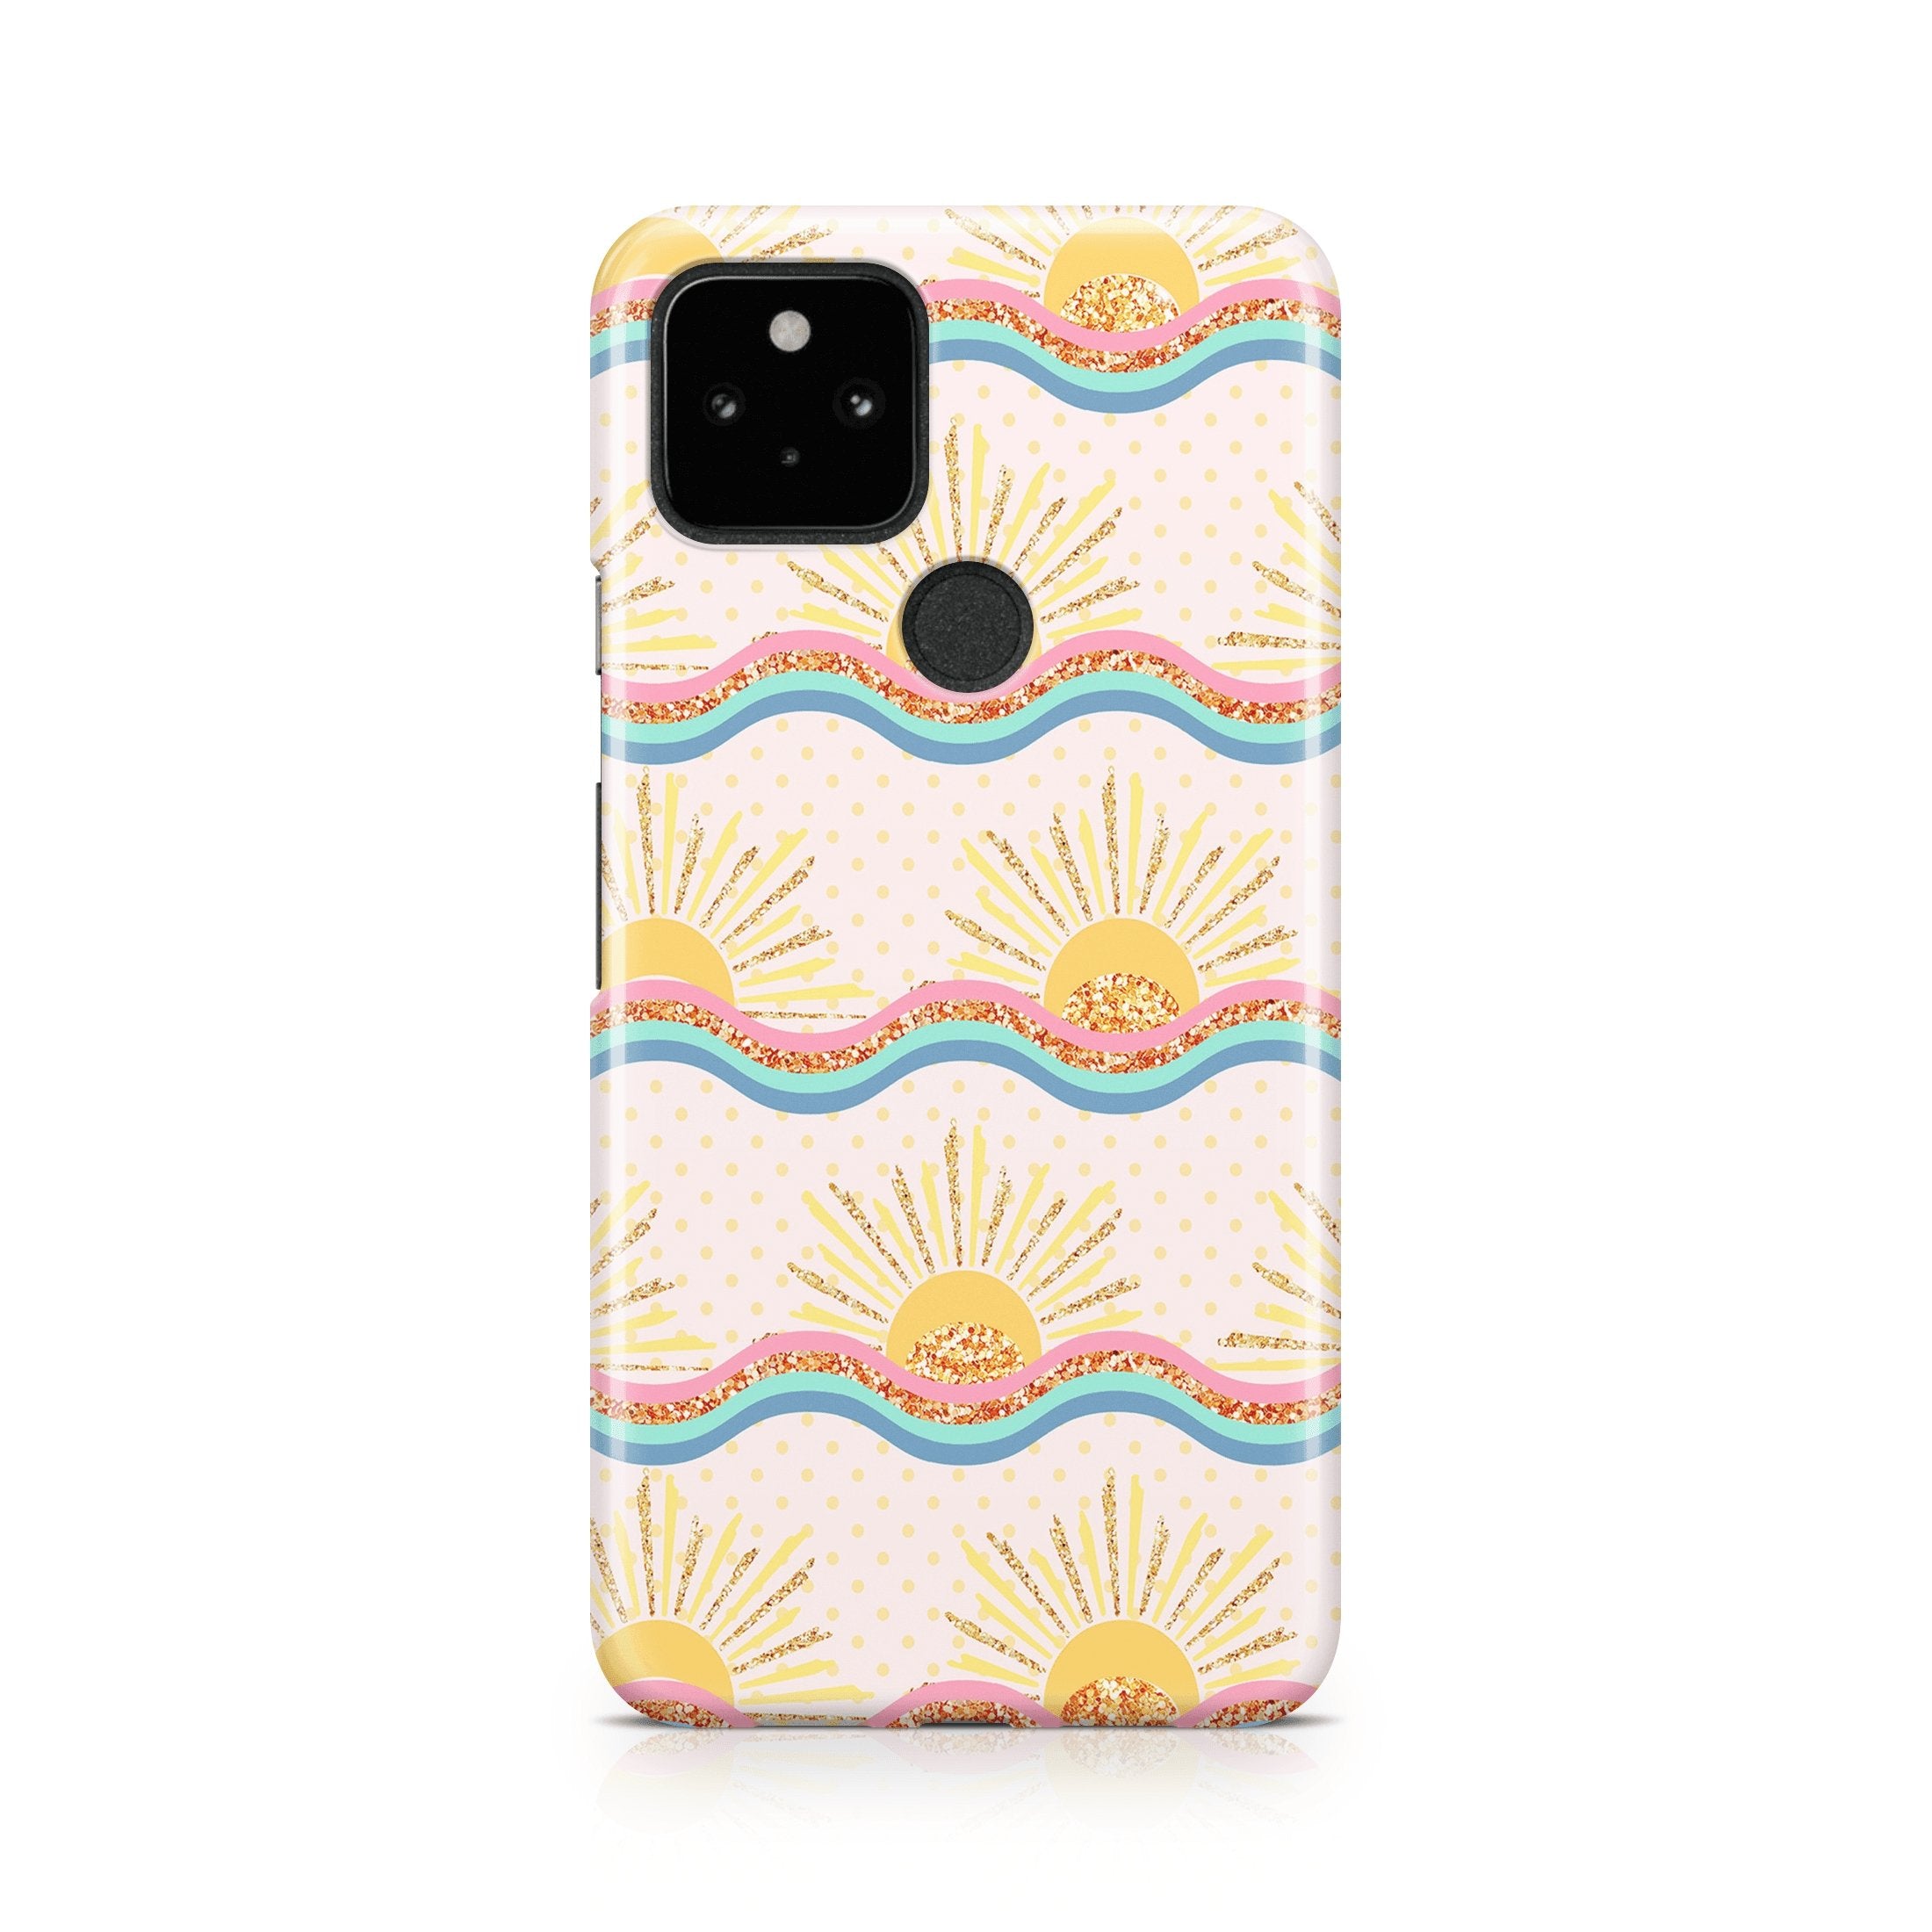 Happy Sun - Google phone case designs by CaseSwagger